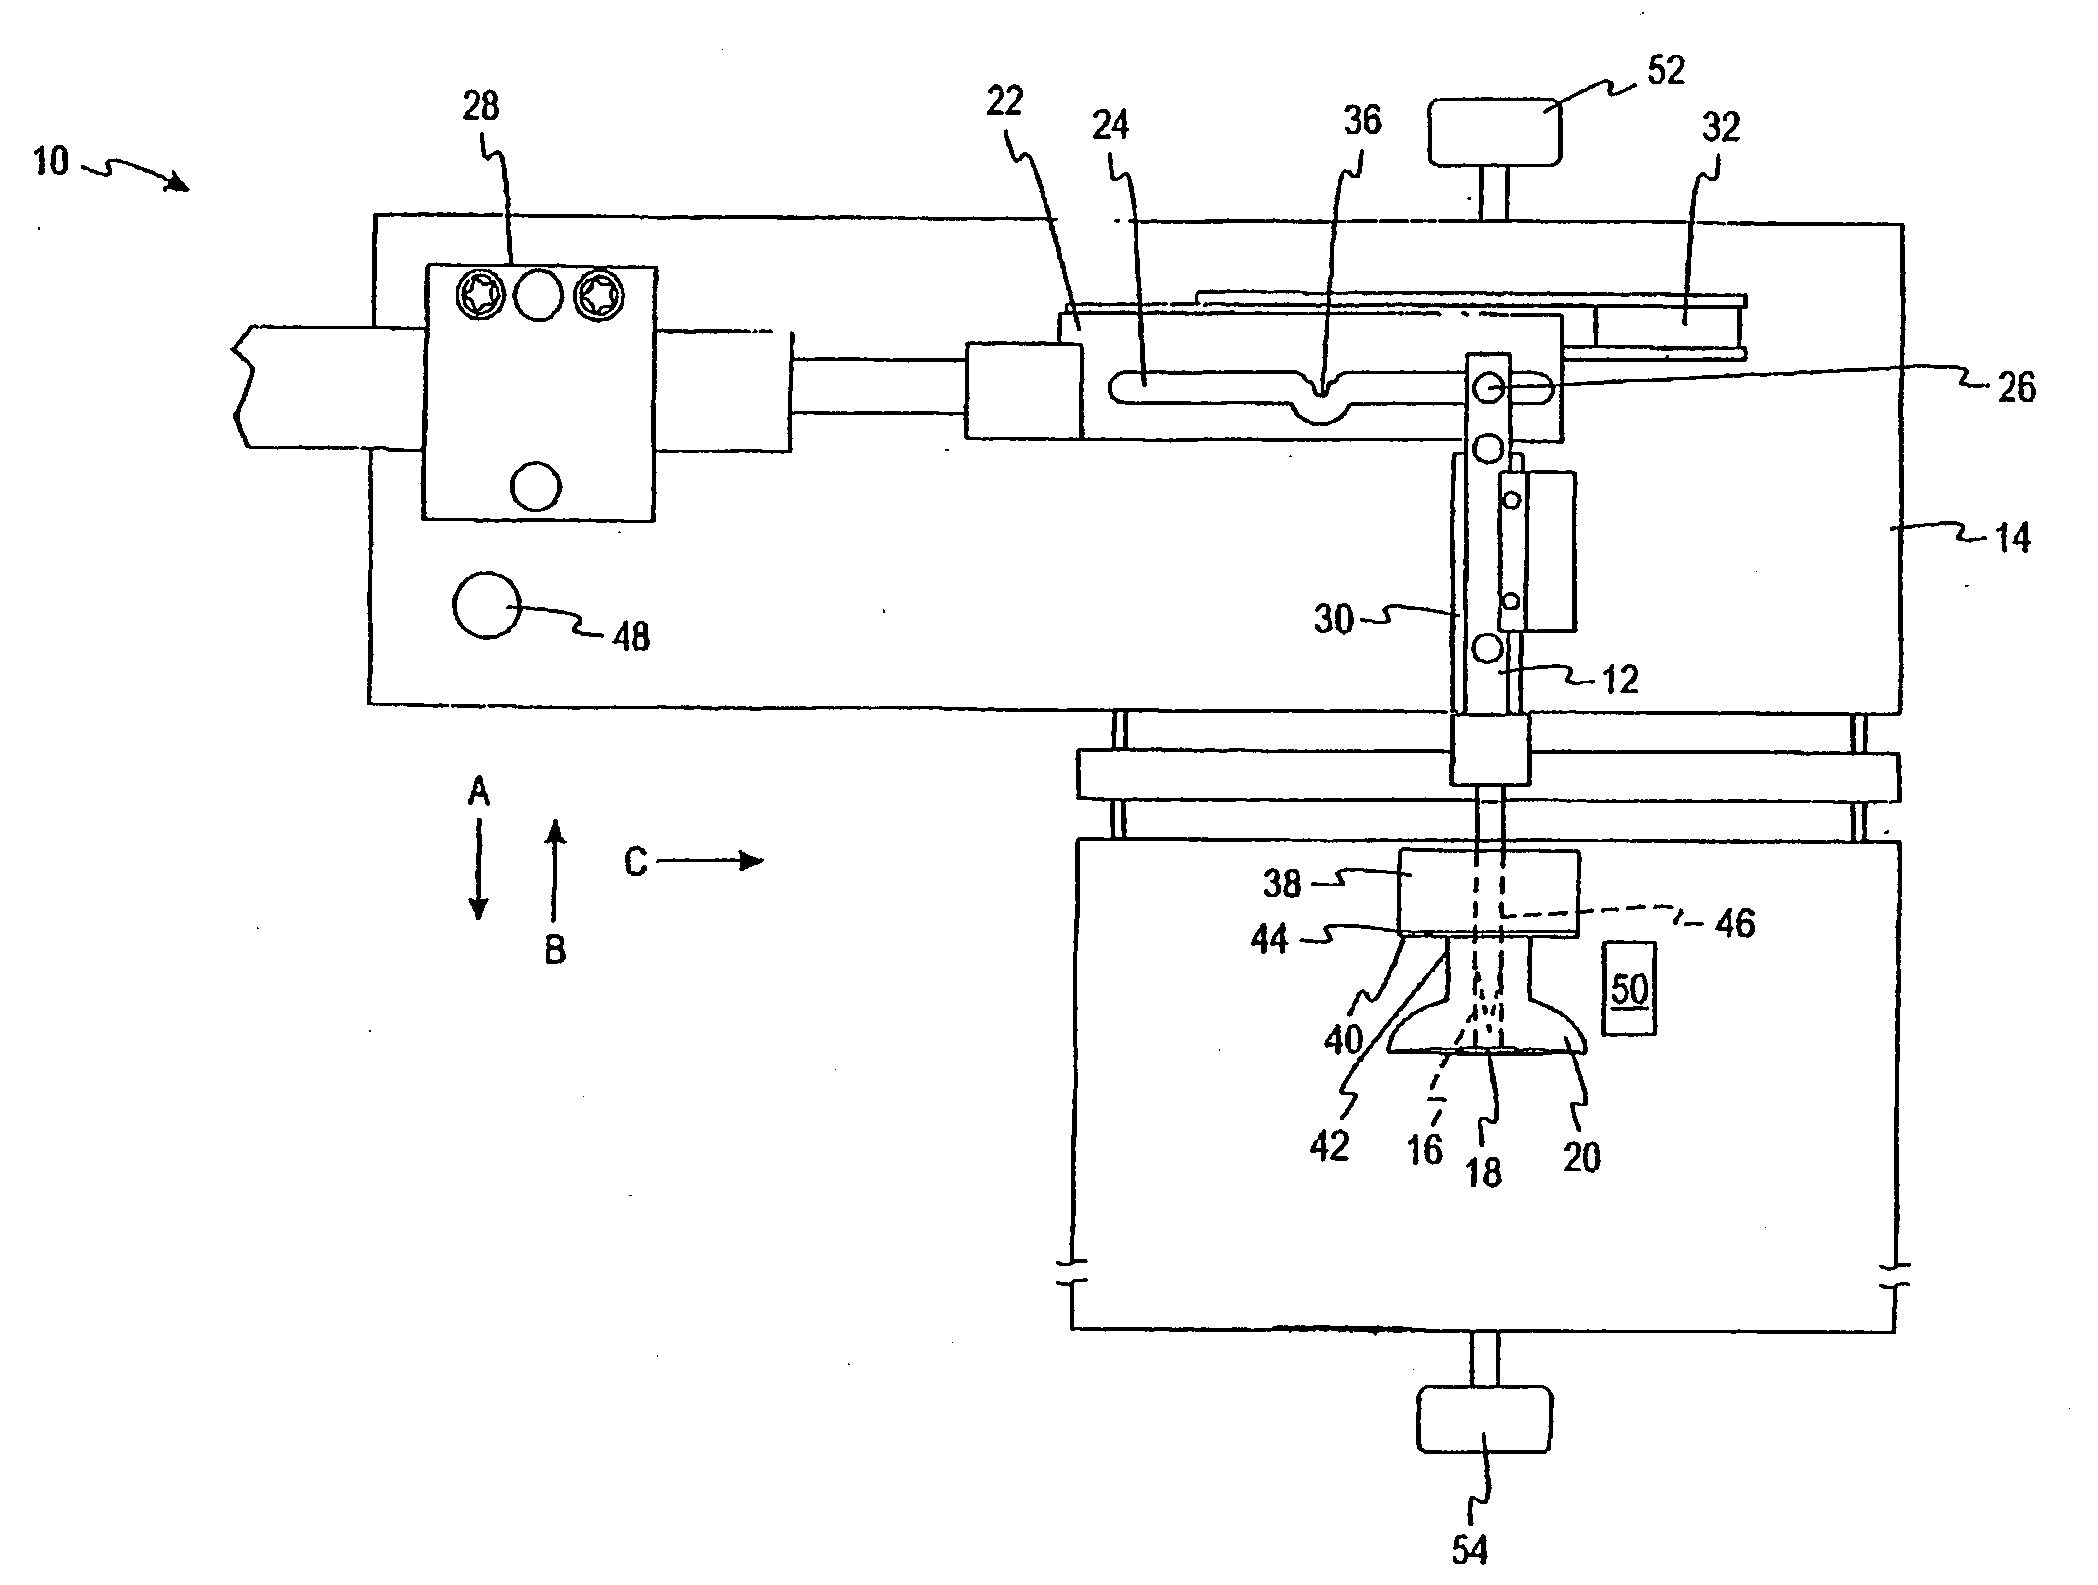 Single Puncture Lancing Fixture with Depth Adjustment and Control of Contact Force